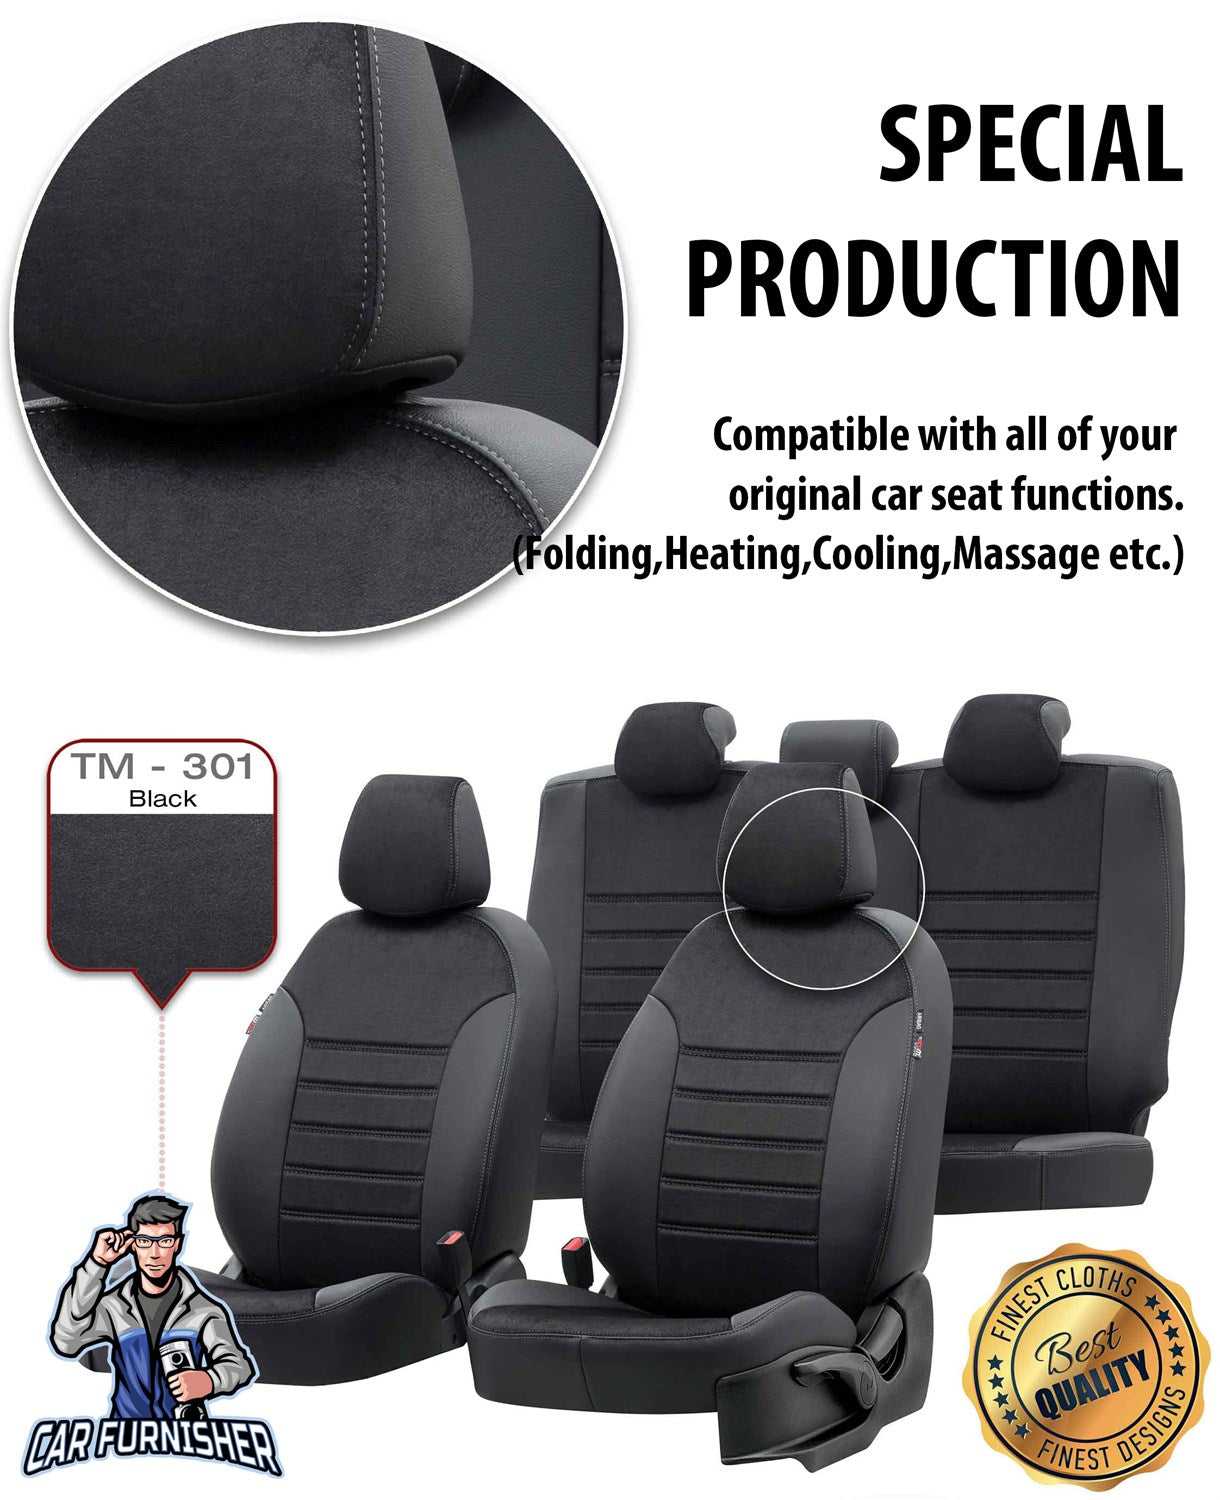 Ford Fiesta Seat Covers Milano Suede Design Black Leather & Suede Fabric